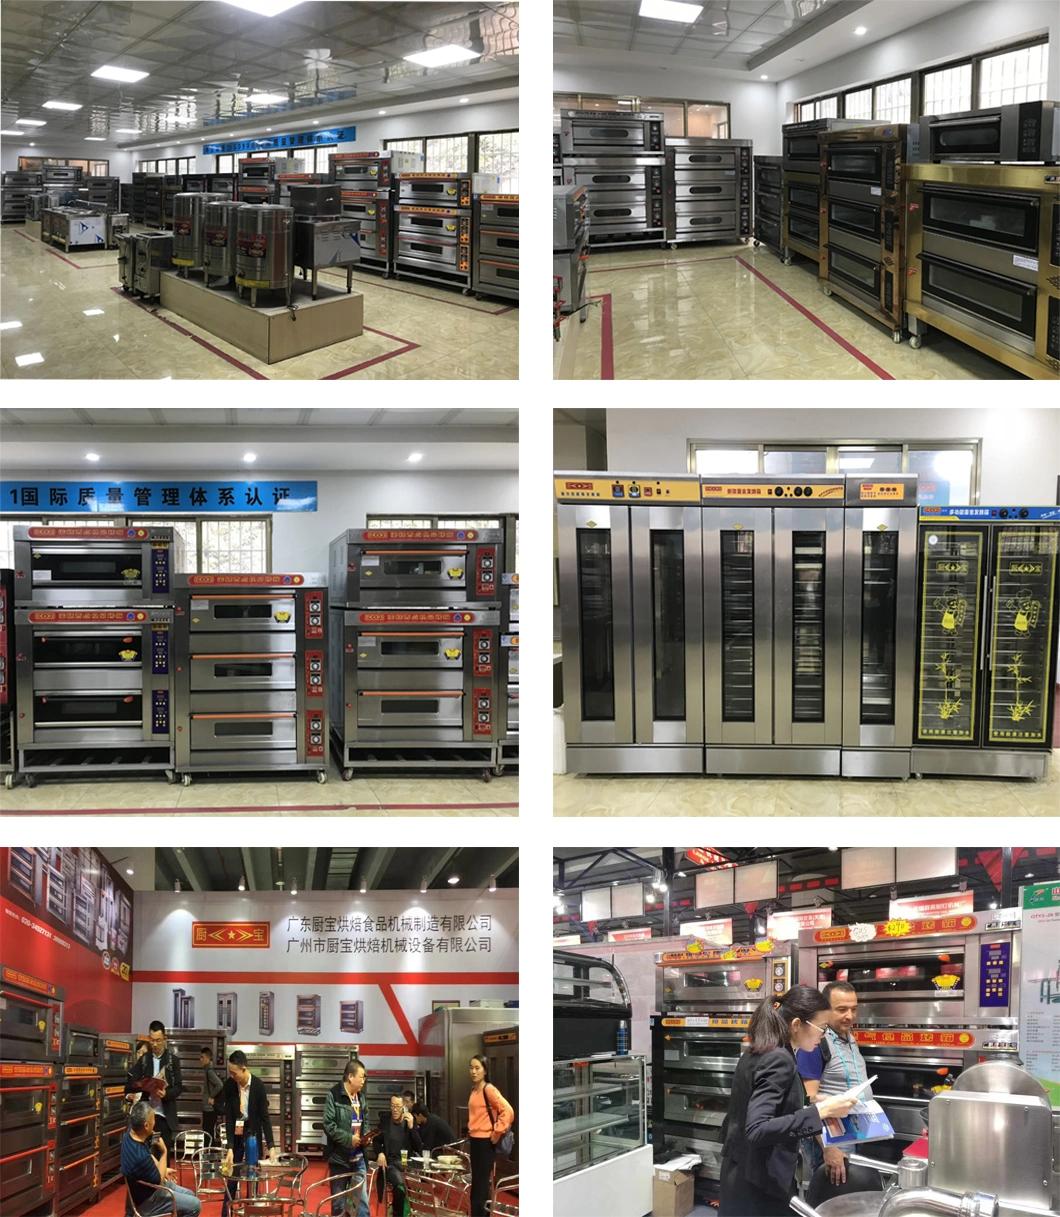 4 Deck 16 Tray Electric Oven for Commercial Restaurant Kitchen Baking Equipment Bakery Machinery Food Machine Oven